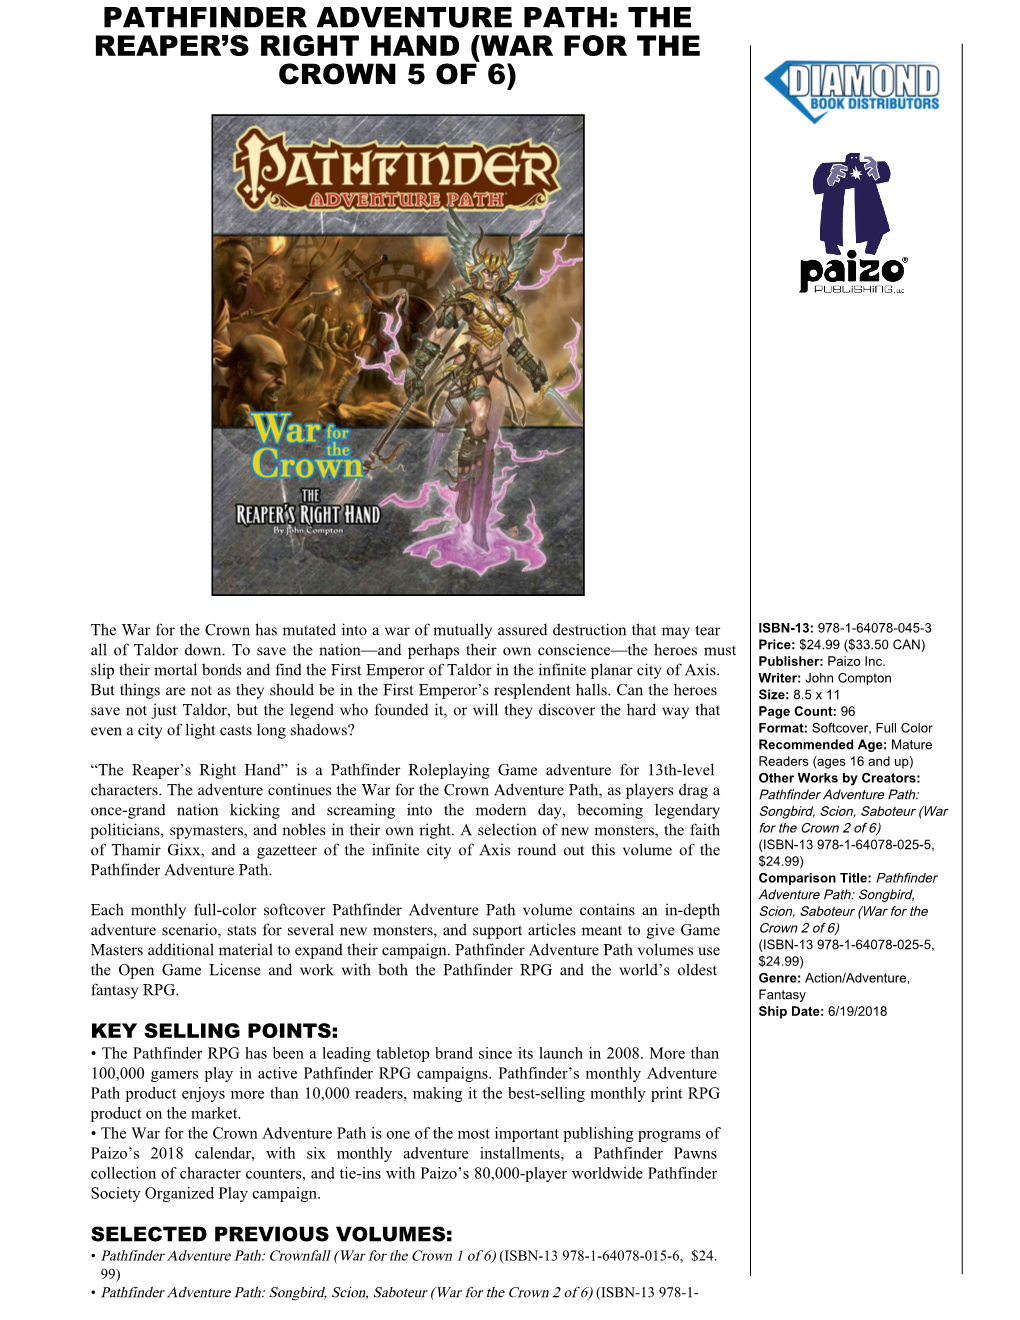 Pathfinder Adventure Path: the Reaper’S Right Hand (War for the Crown 5 of 6)